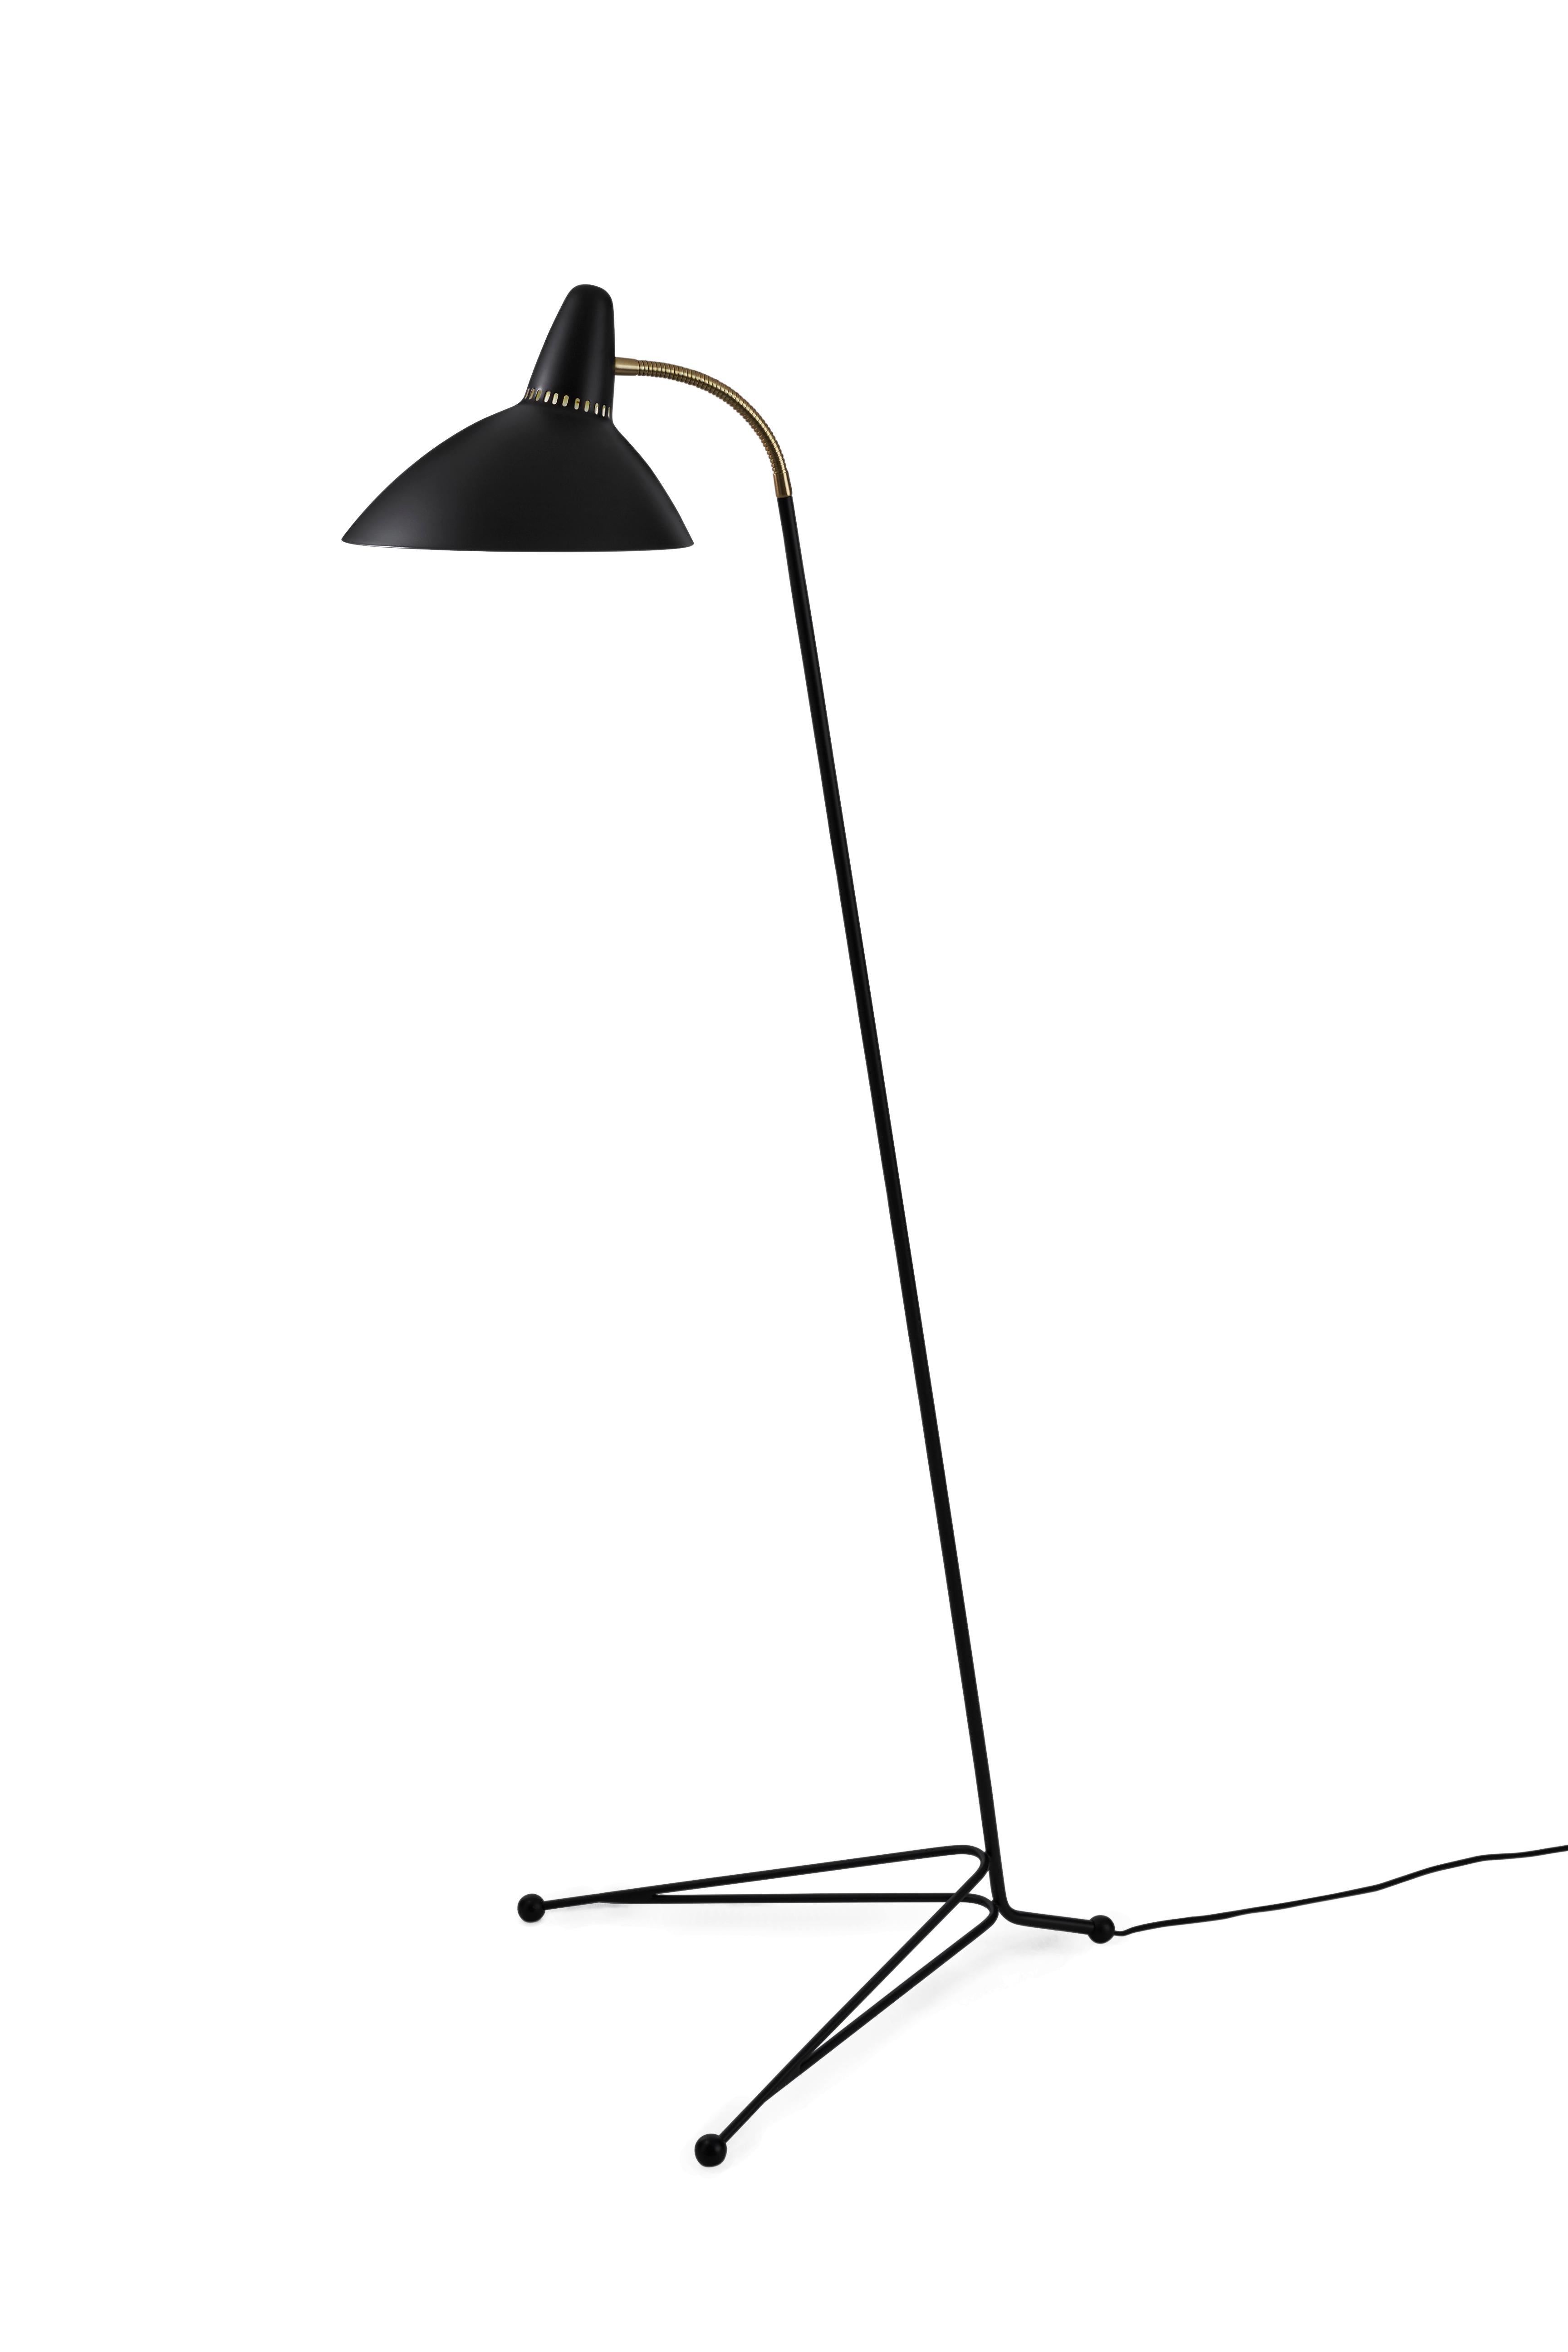 For Sale: Black Lightsome Floor Lamp, by Svend Aage Holm Sorensen from Warm Nordic